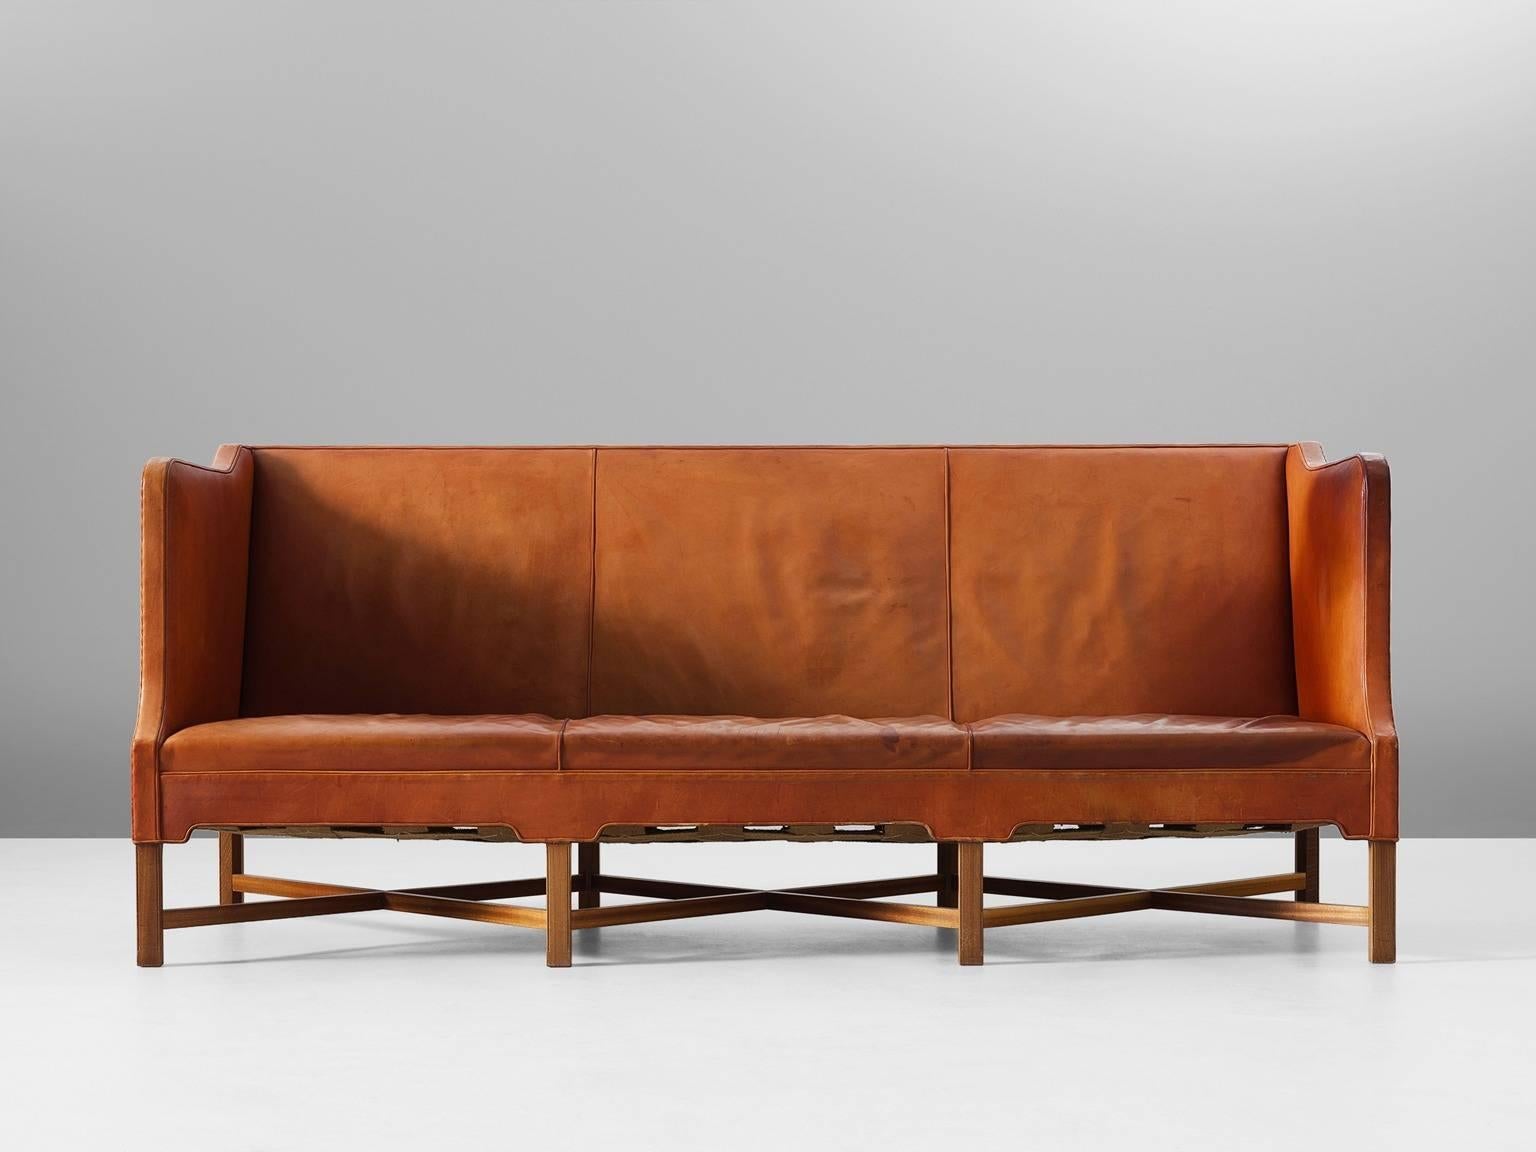 Kaare Klint for Rud Rasmussen, sofa model 4118, in leather and mahogany, by Denmark 1929.

Classic and elegant Scandinavian three-seat sofa by Kaare Klint. This model was designed in 1929. The base consist of eight legs in mahogany with X-shaped